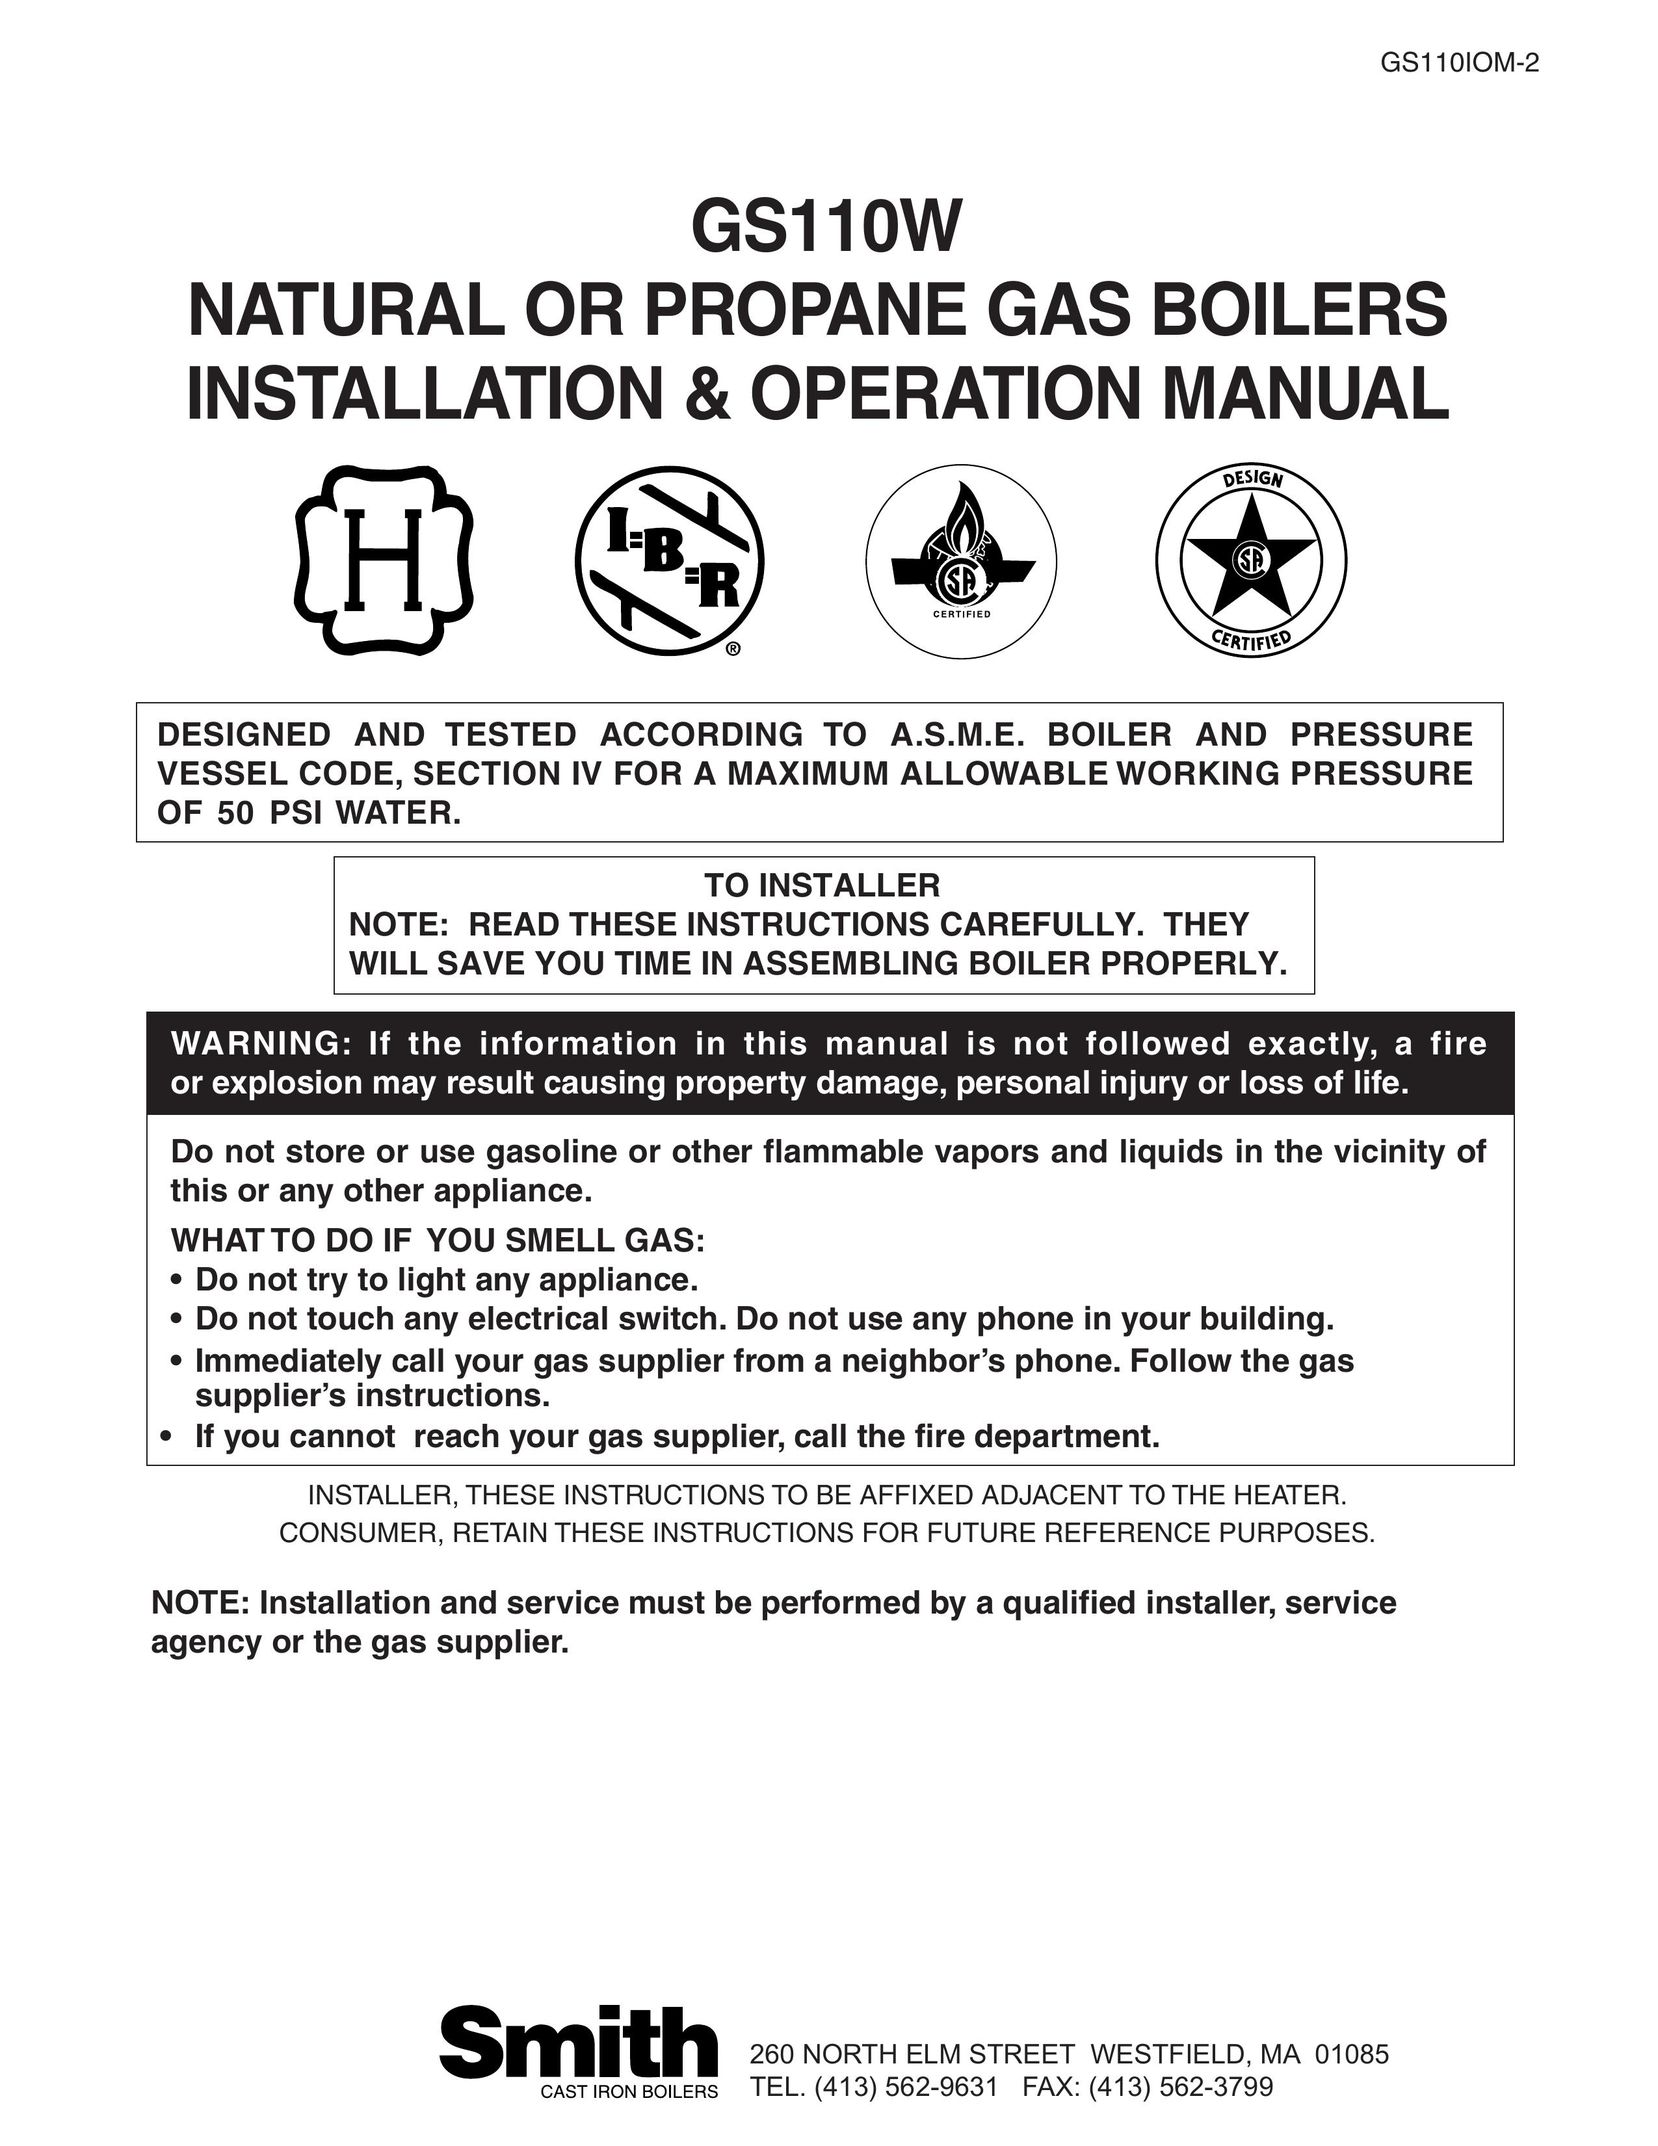 Smith Cast Iron Boilers GS110W Boiler User Manual